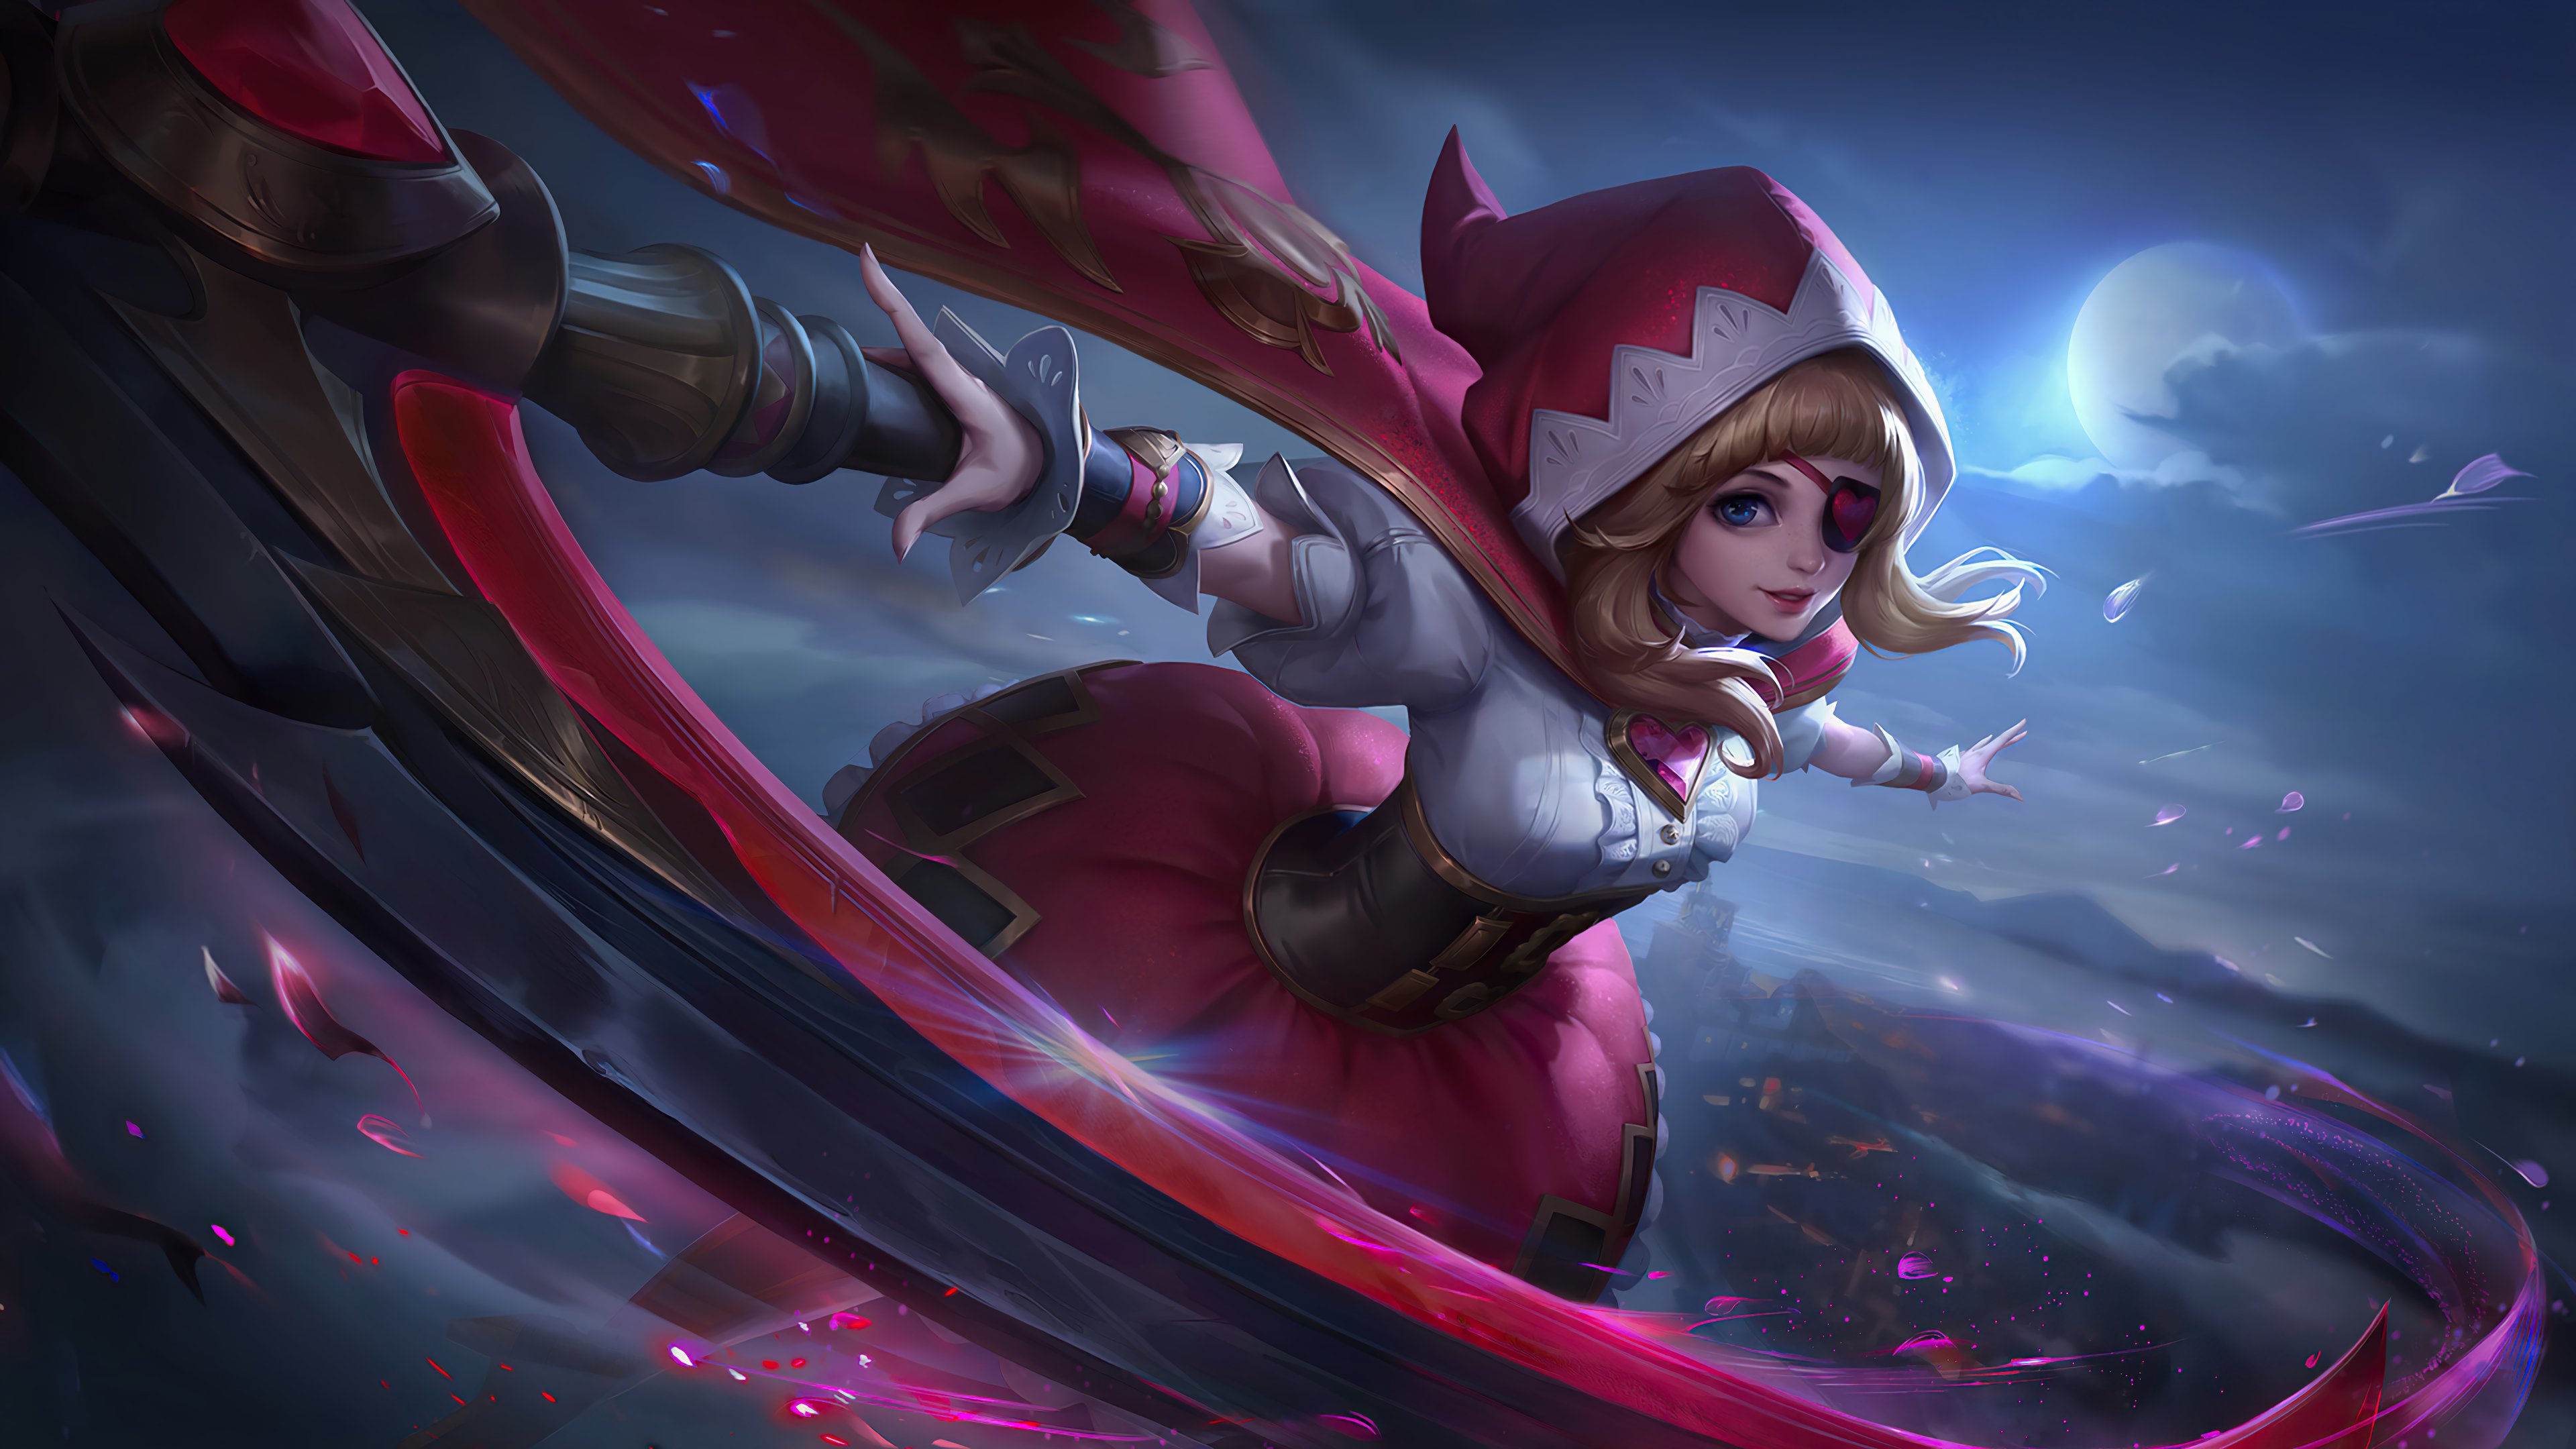 Ruby Revamp from Mobile Legends Wallpaper 4k Ultra HD ID:6433